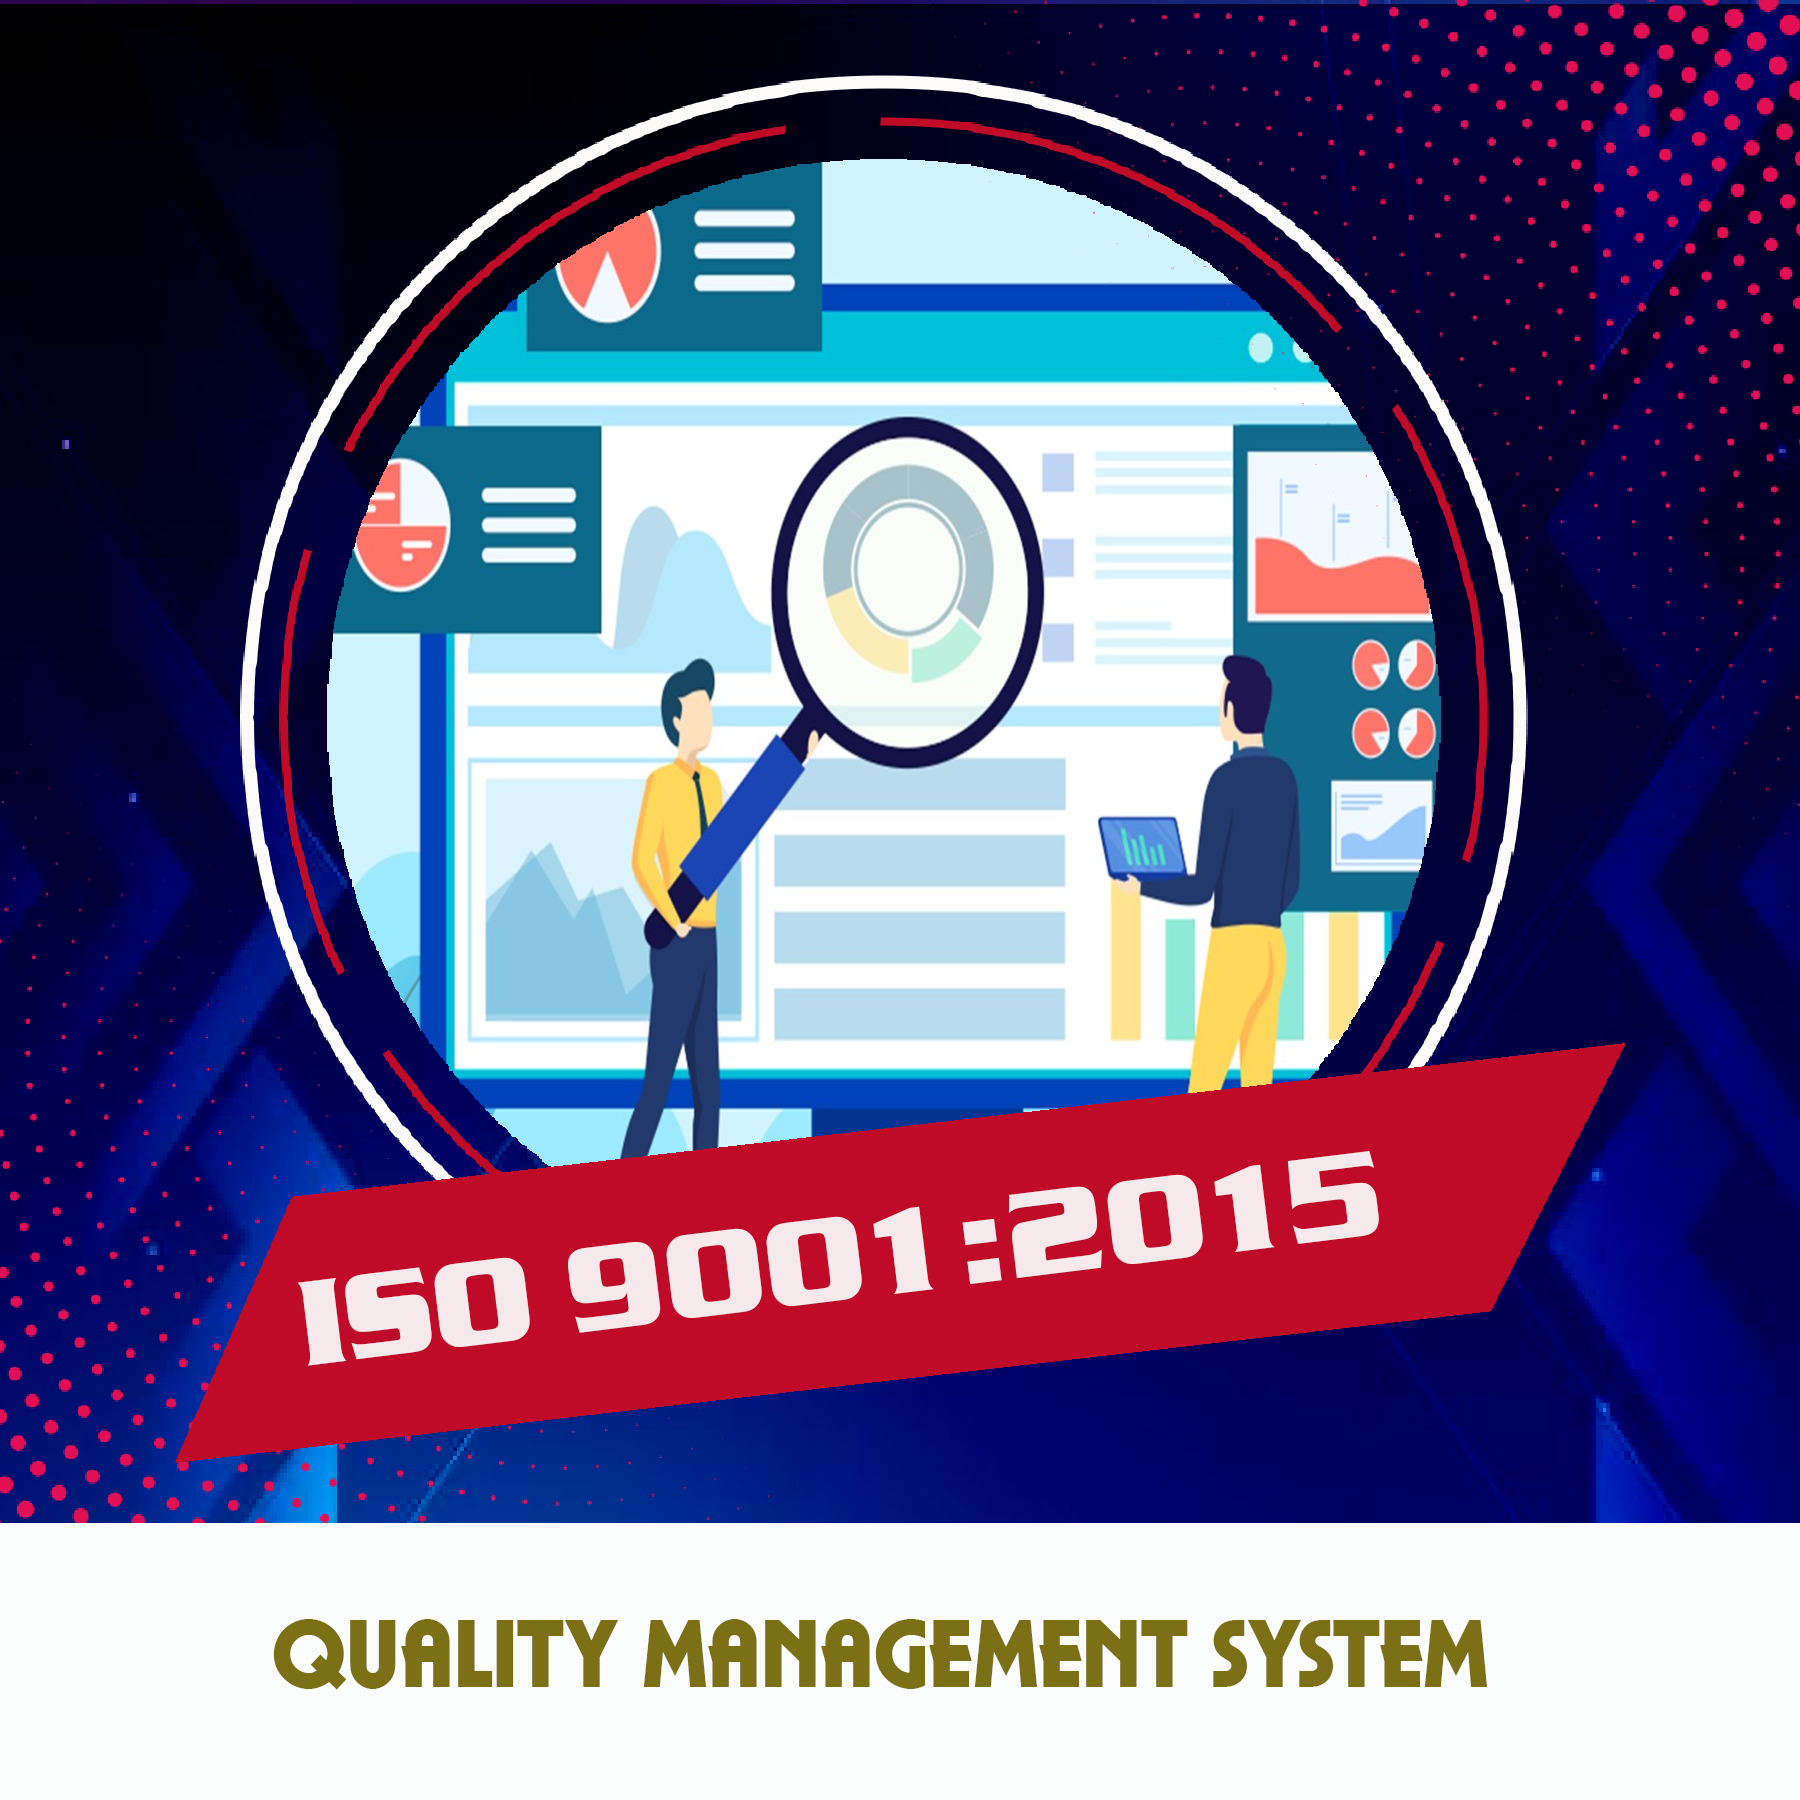 QUALITY MANAGEMENT SYSTEM- ISO 9001:2015 BENEFITS